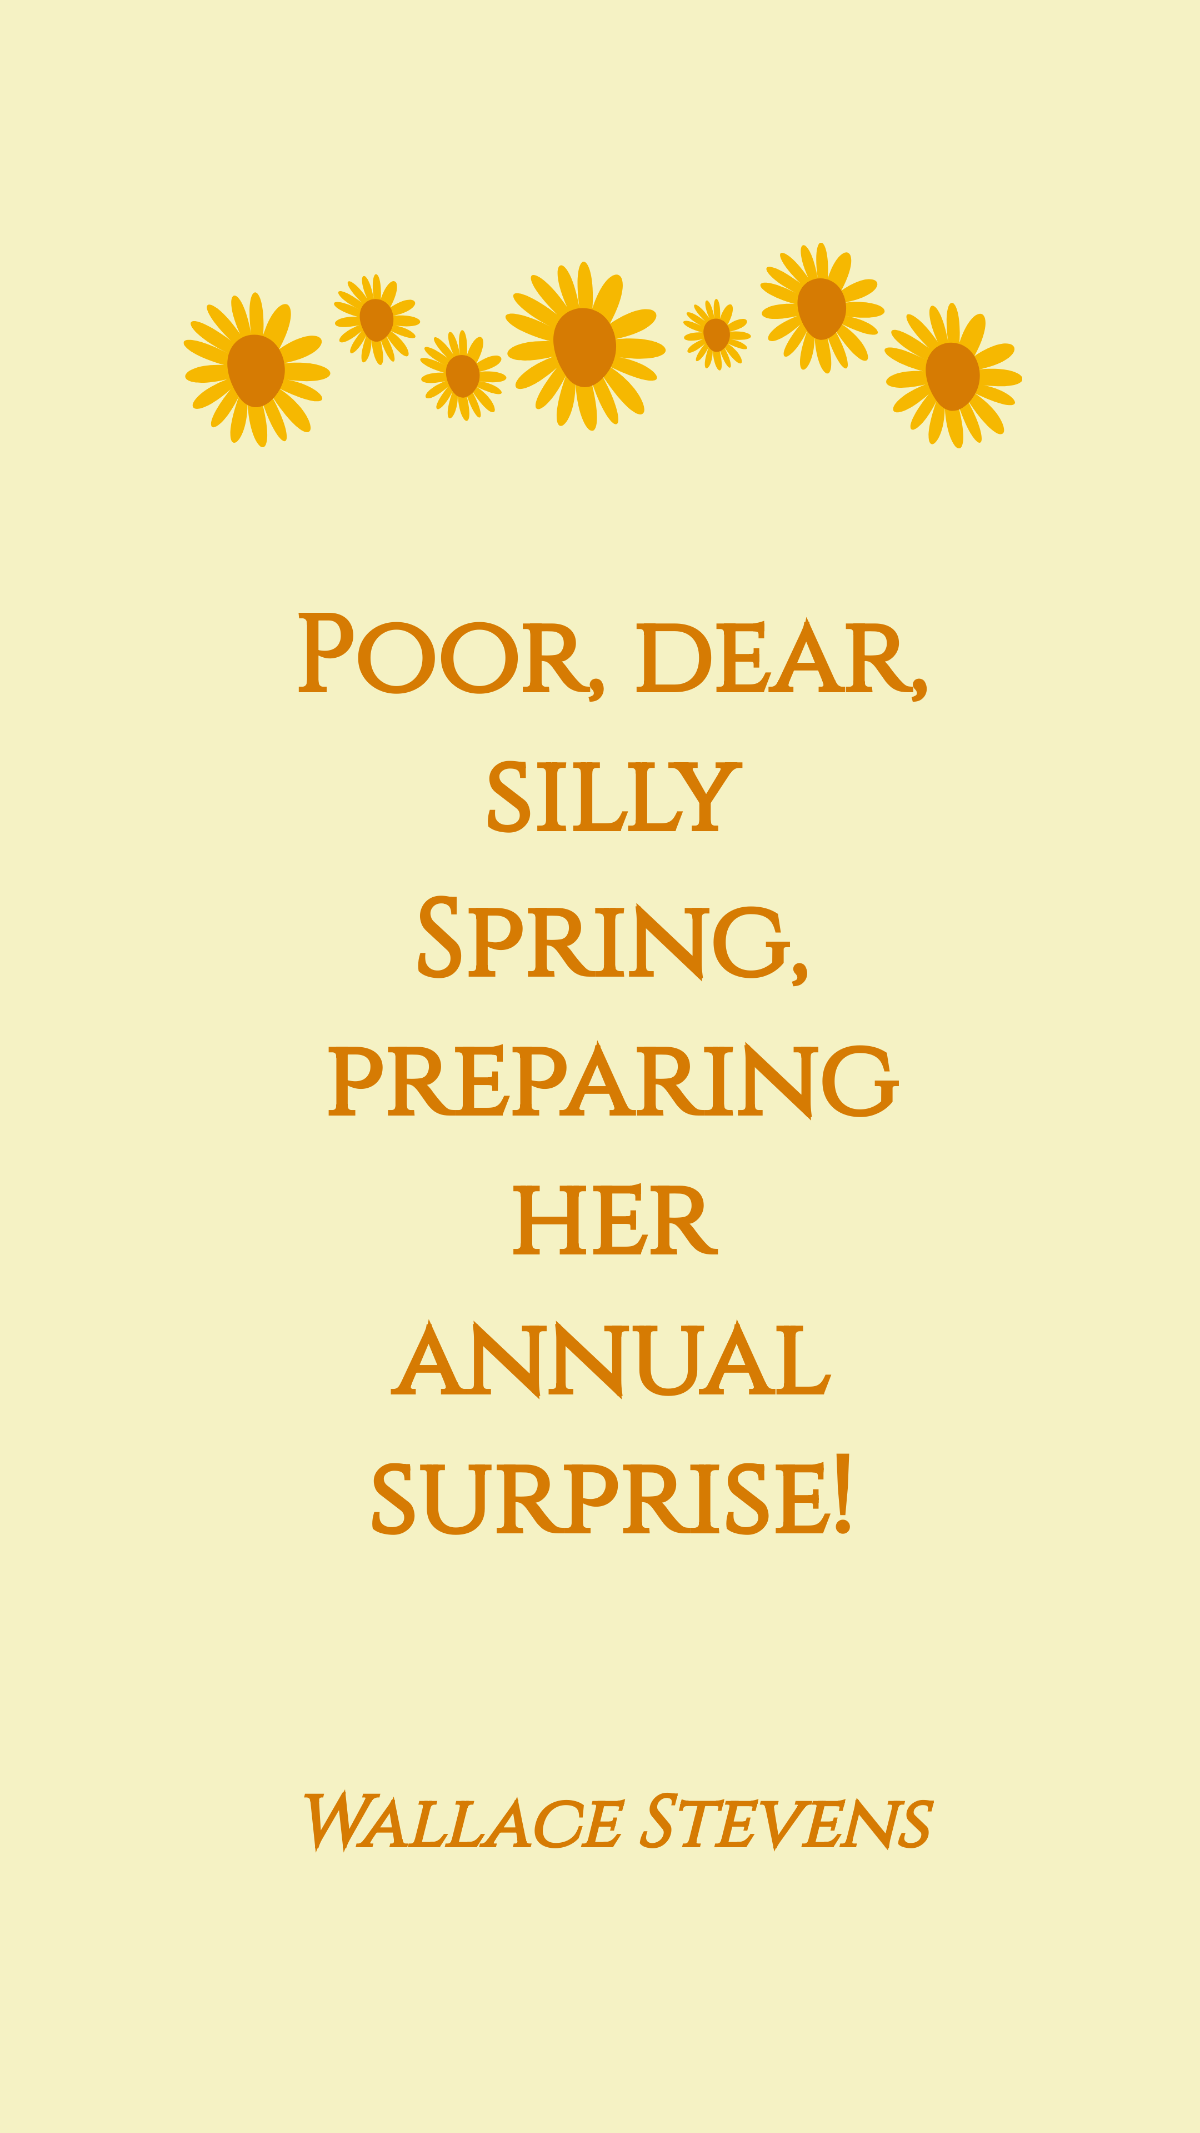 Wallace Stevens - Poor, dear, silly Spring, preparing her annual surprise! Template